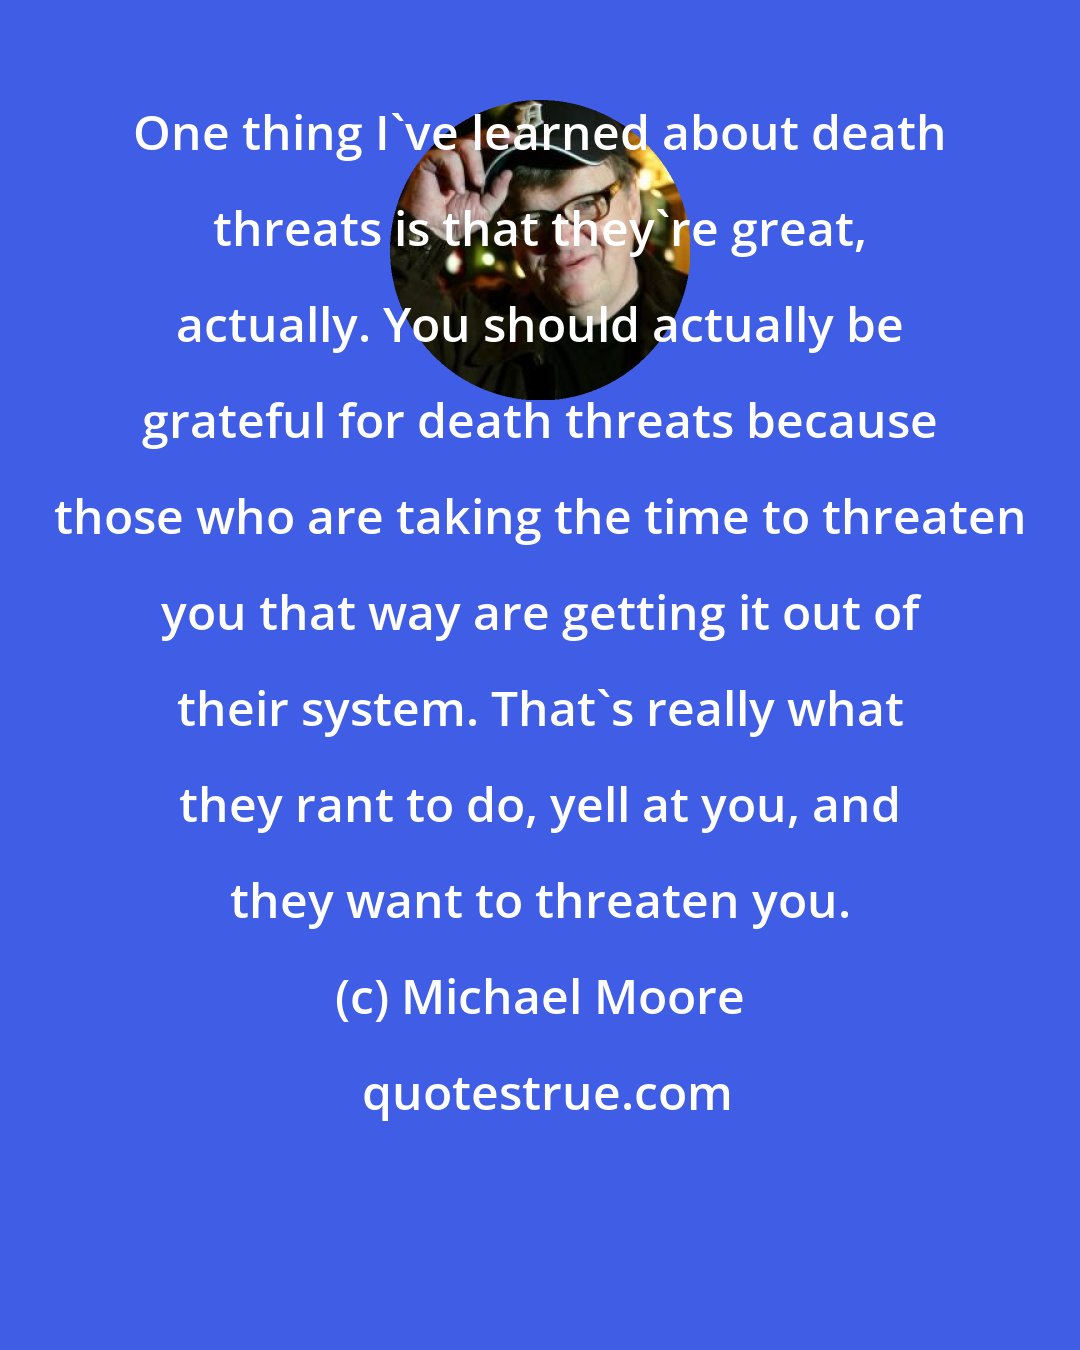 Michael Moore: One thing I've learned about death threats is that they're great, actually. You should actually be grateful for death threats because those who are taking the time to threaten you that way are getting it out of their system. That's really what they rant to do, yell at you, and they want to threaten you.